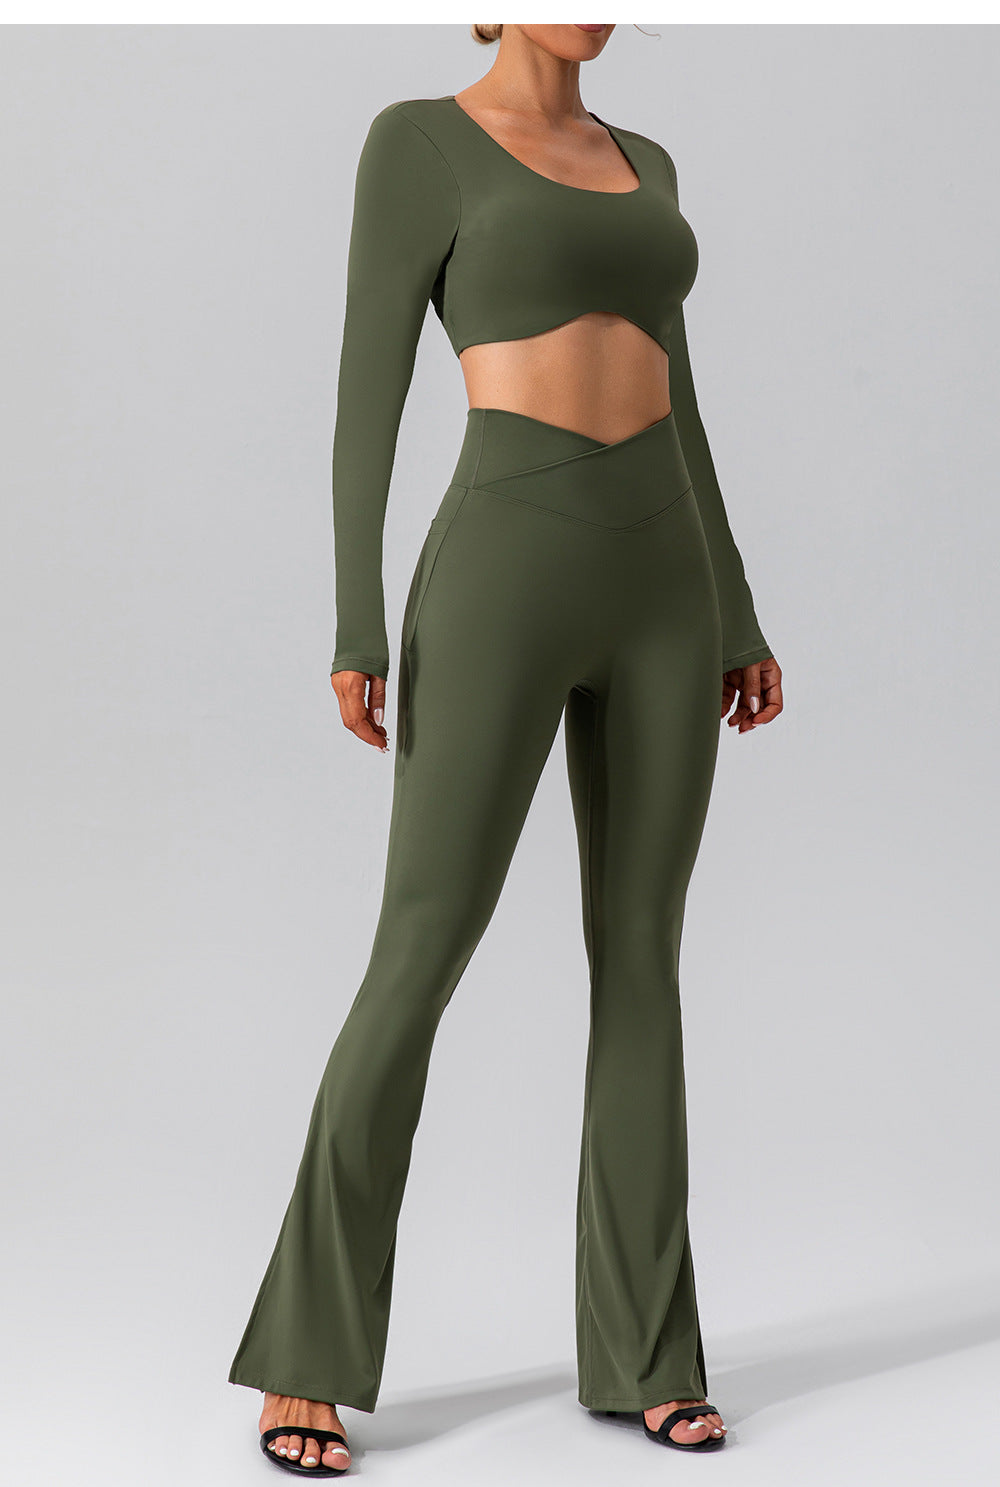 2023.08 autumn naked stretch sports yoga bell-bottom pants tight and thin high waist peach hip-lifting fitness trousers